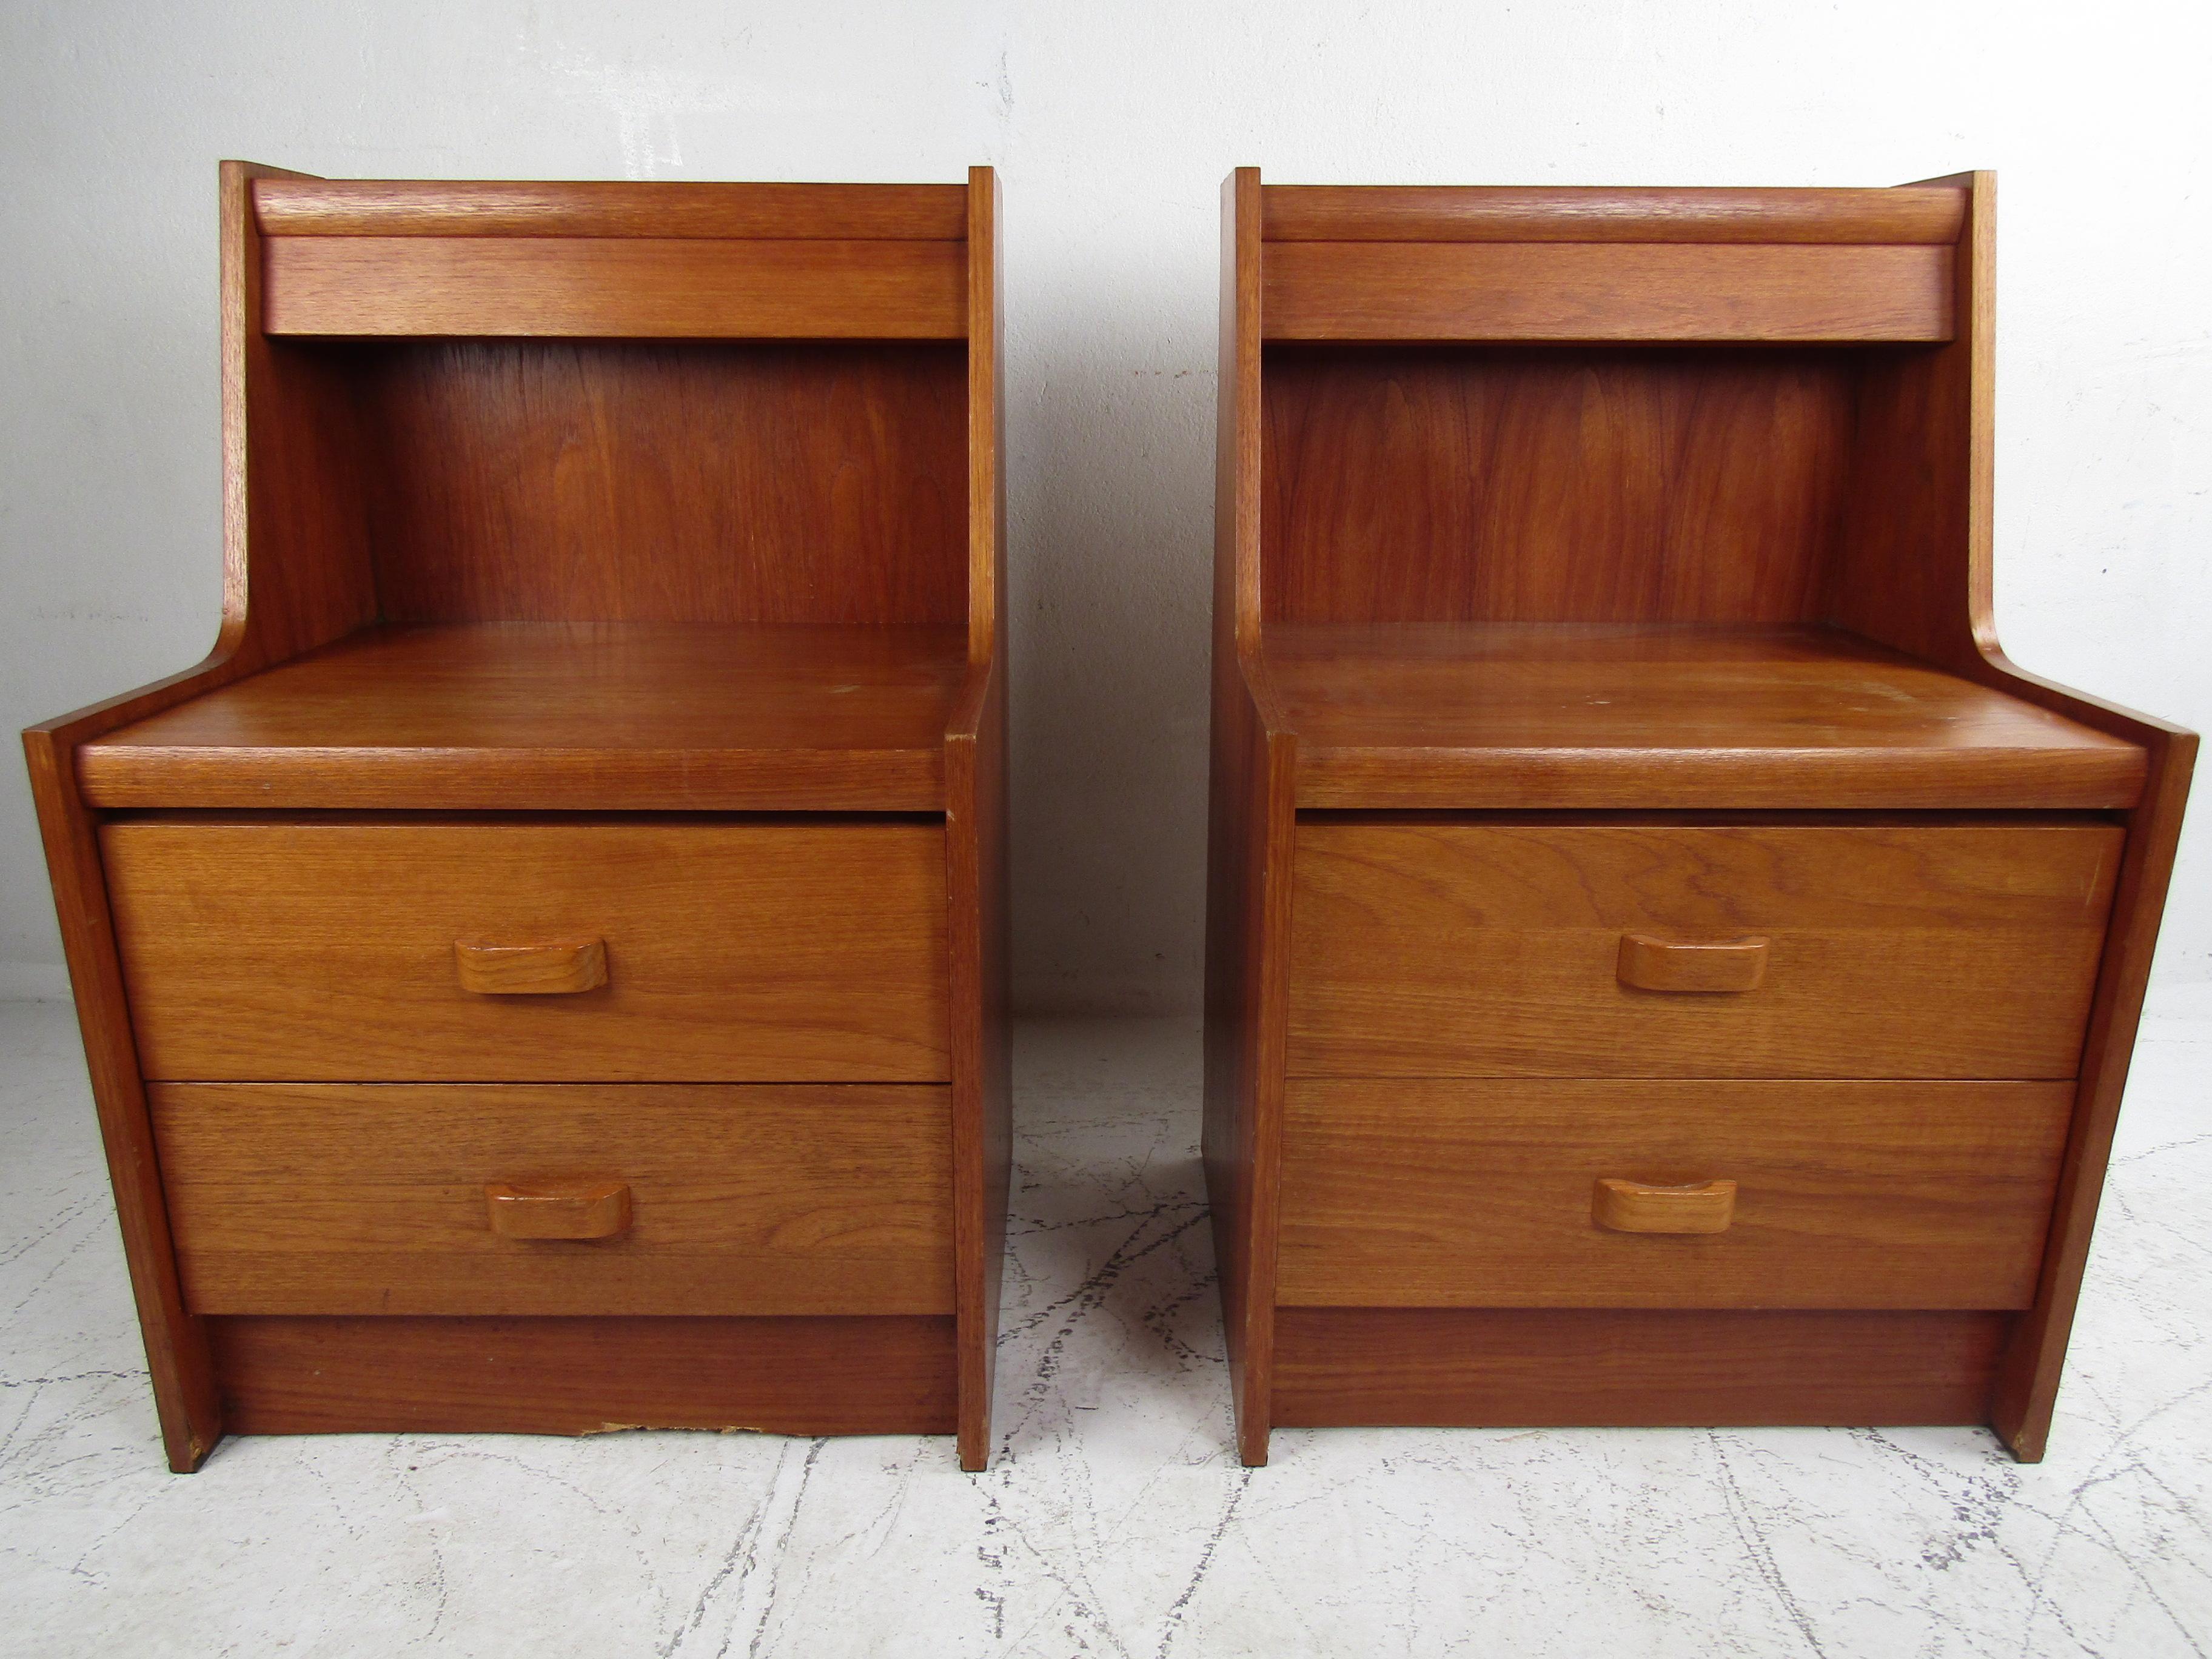 Nice pair of midcentury nightstands made by the French-Canadian manufacturer R.S. Furniture. Teak veneer exterior. Two drawers with sculpted pulls on each piece. Additionally, each stand has a light fixture attached to the apex of the case's frame.